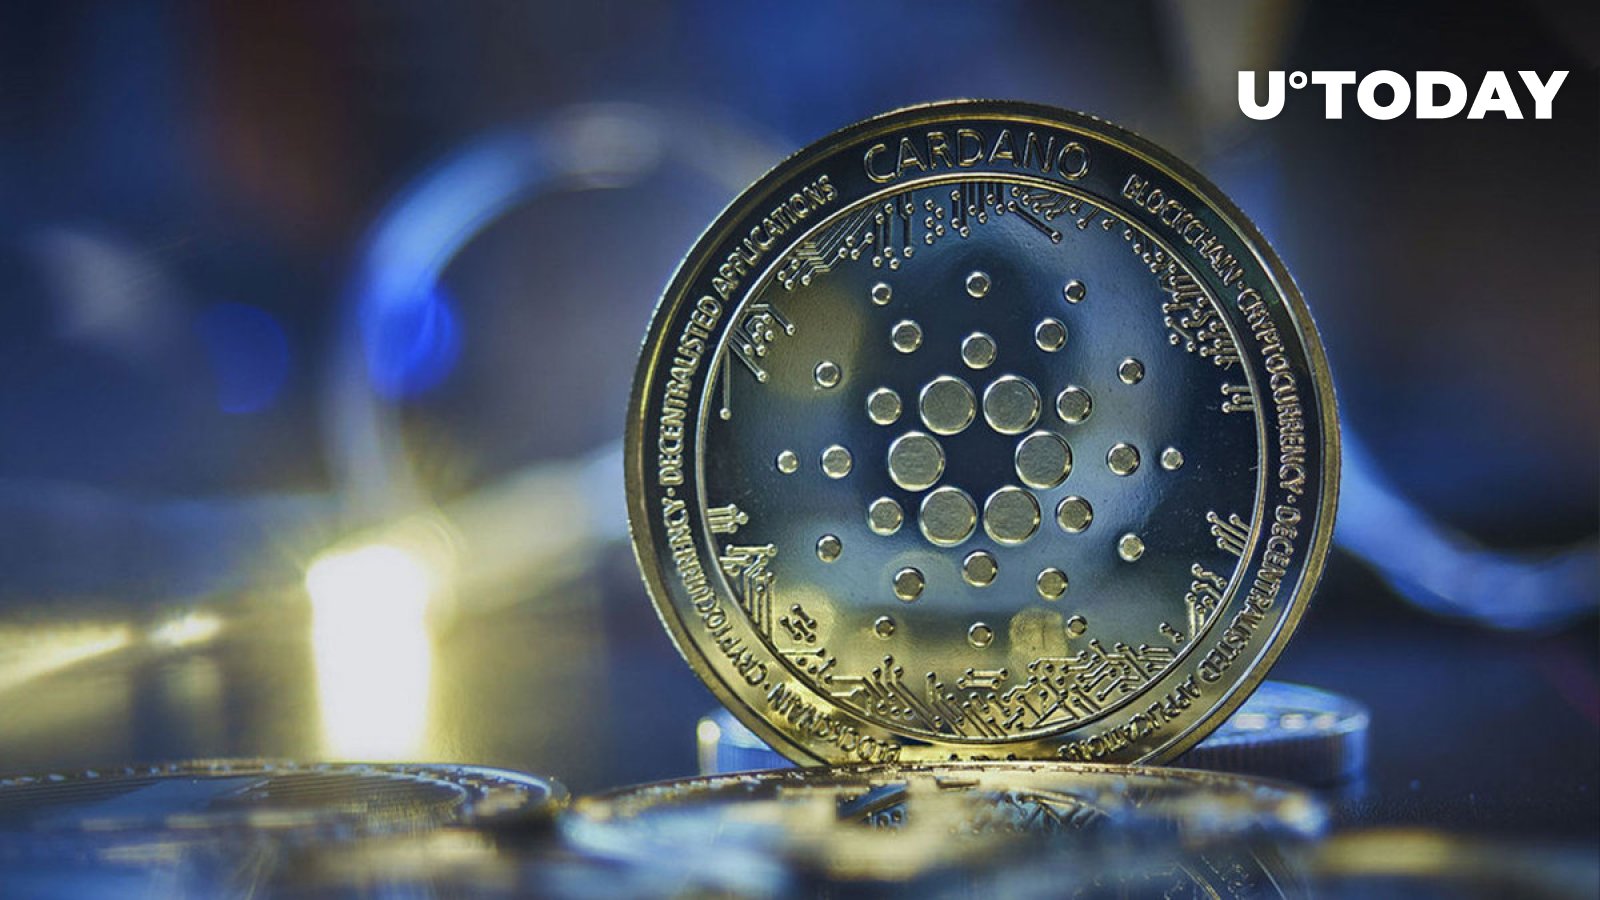 Cardano (ADA) Price Growth Lags, Here’s What Can Drive Short-Term Growth